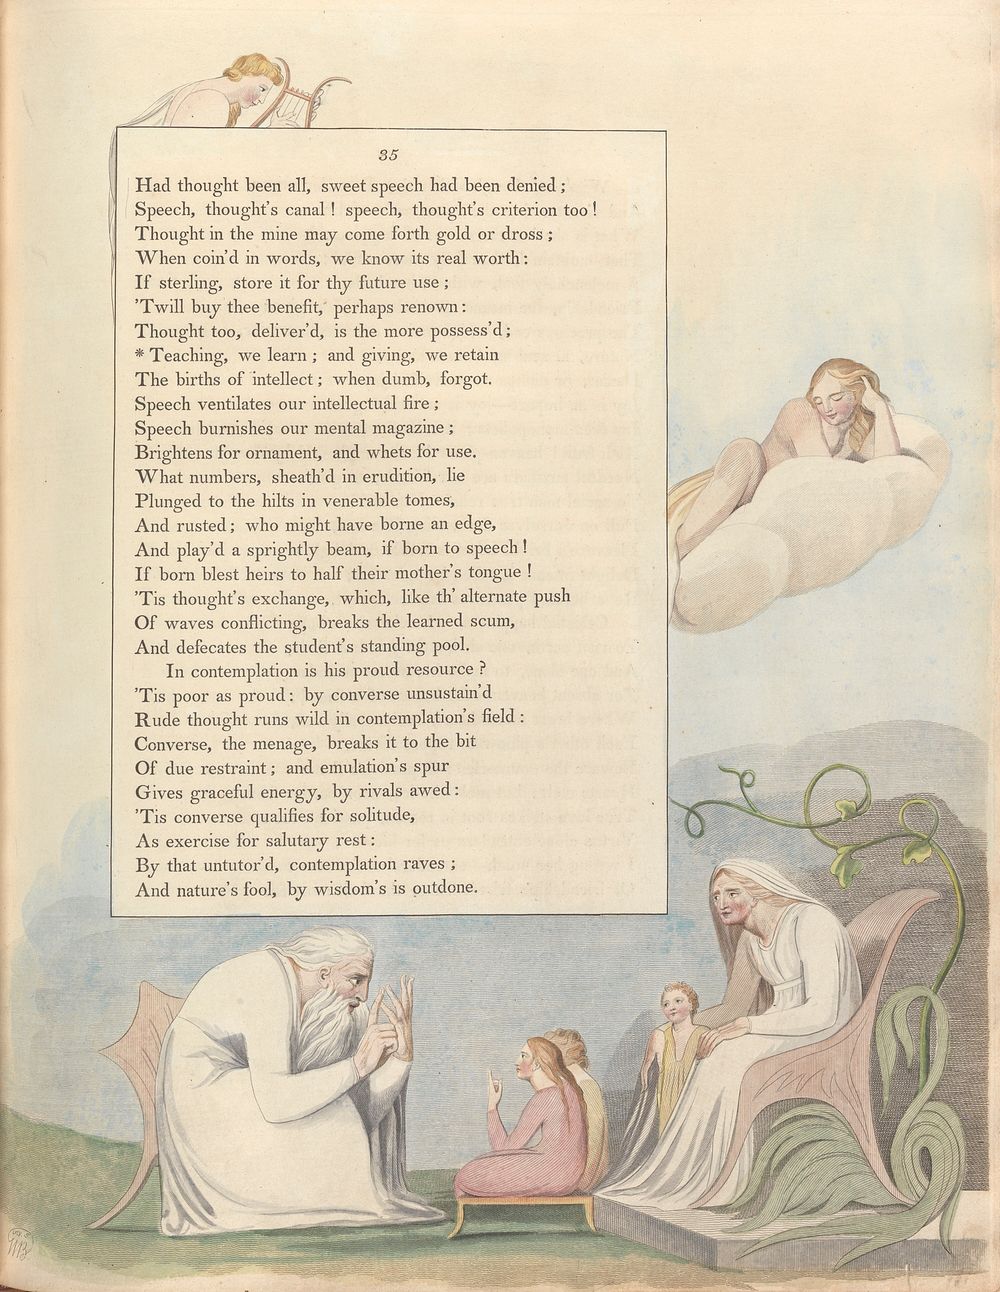 Young's Night Thoughts, Page 35, "Teaching, we learn; and giving, we retain" by William Blake.